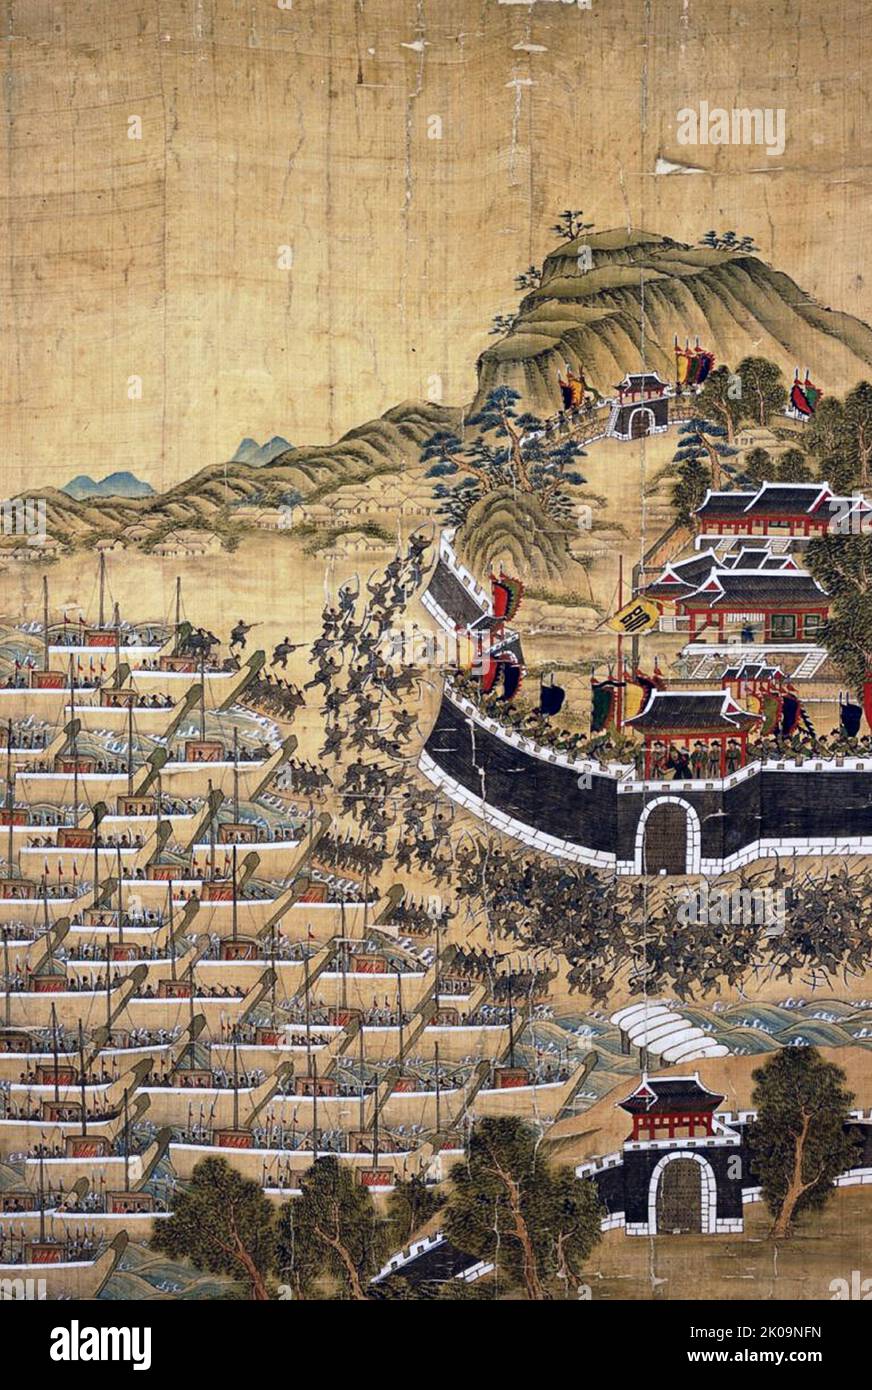 The Battle of Busan of 1592 (Battle of Busanpo or Battle of Busan Bay), a naval bombardment of anchored Japanese ships at Busan. Yi Sun-sin managed to destroy over 100 Japanese ships and retreated with minimal casualties. It was a naval engagement that took place on 1 September 1592 during the first phase of the Japanese invasions of Korea. Stock Photo